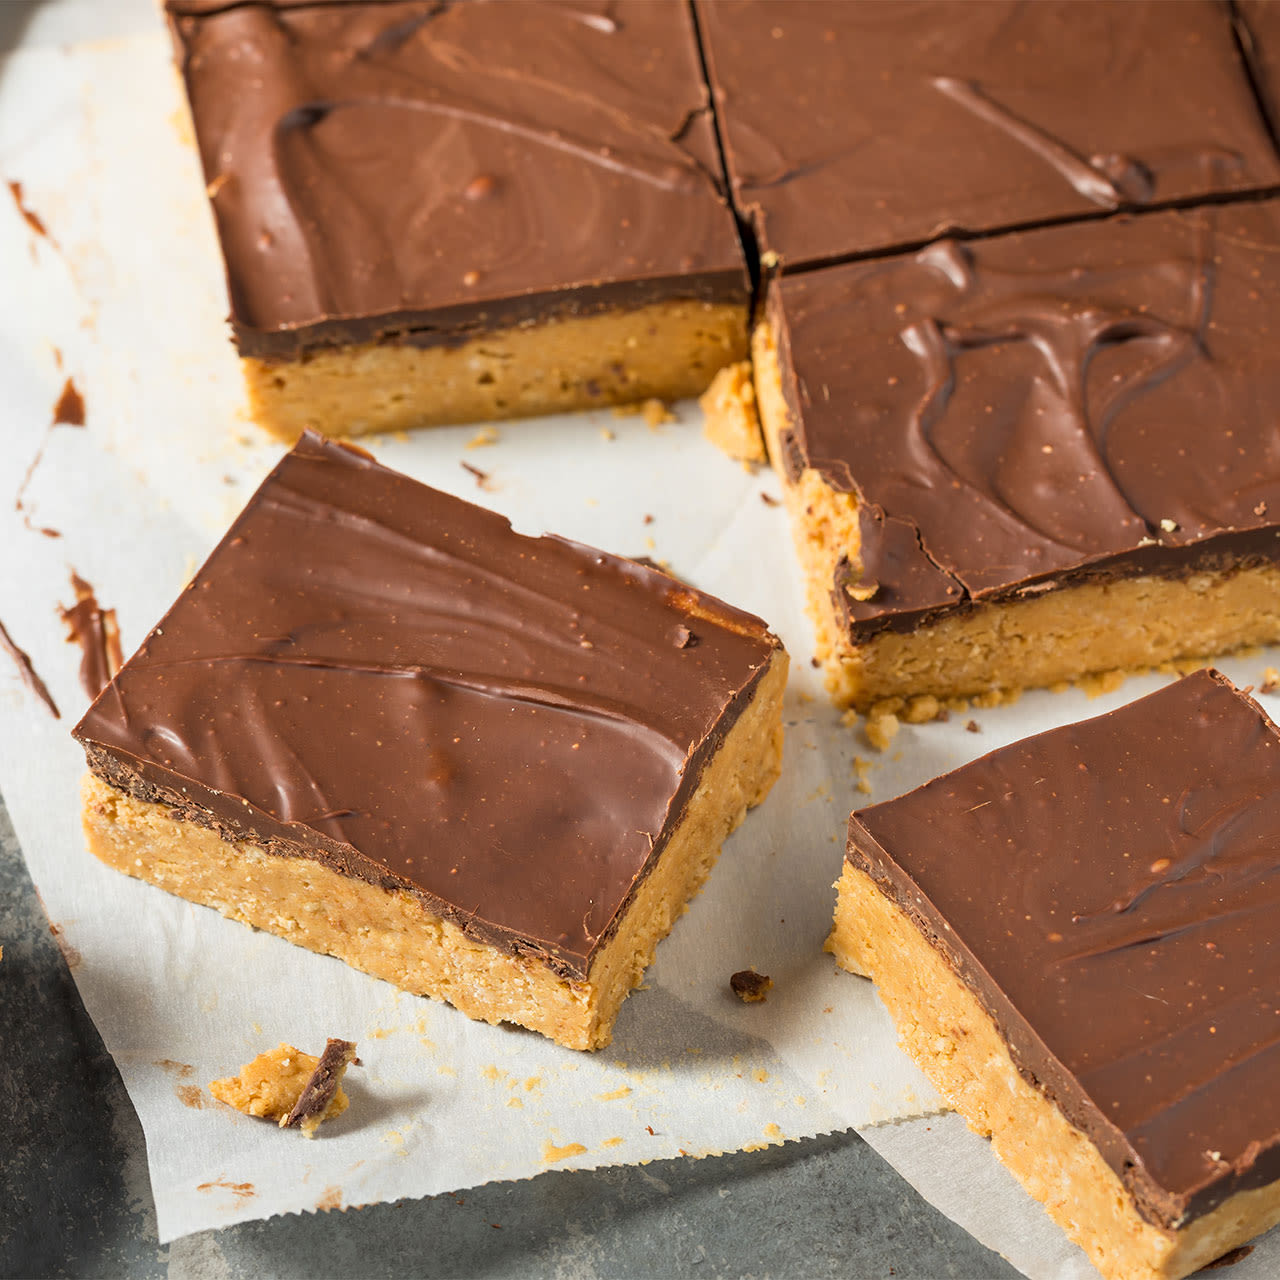 Nutritionist Reveals The High-Protein Chocolate-Peanut Butter Bars You Should Make This Summer For Weight Loss